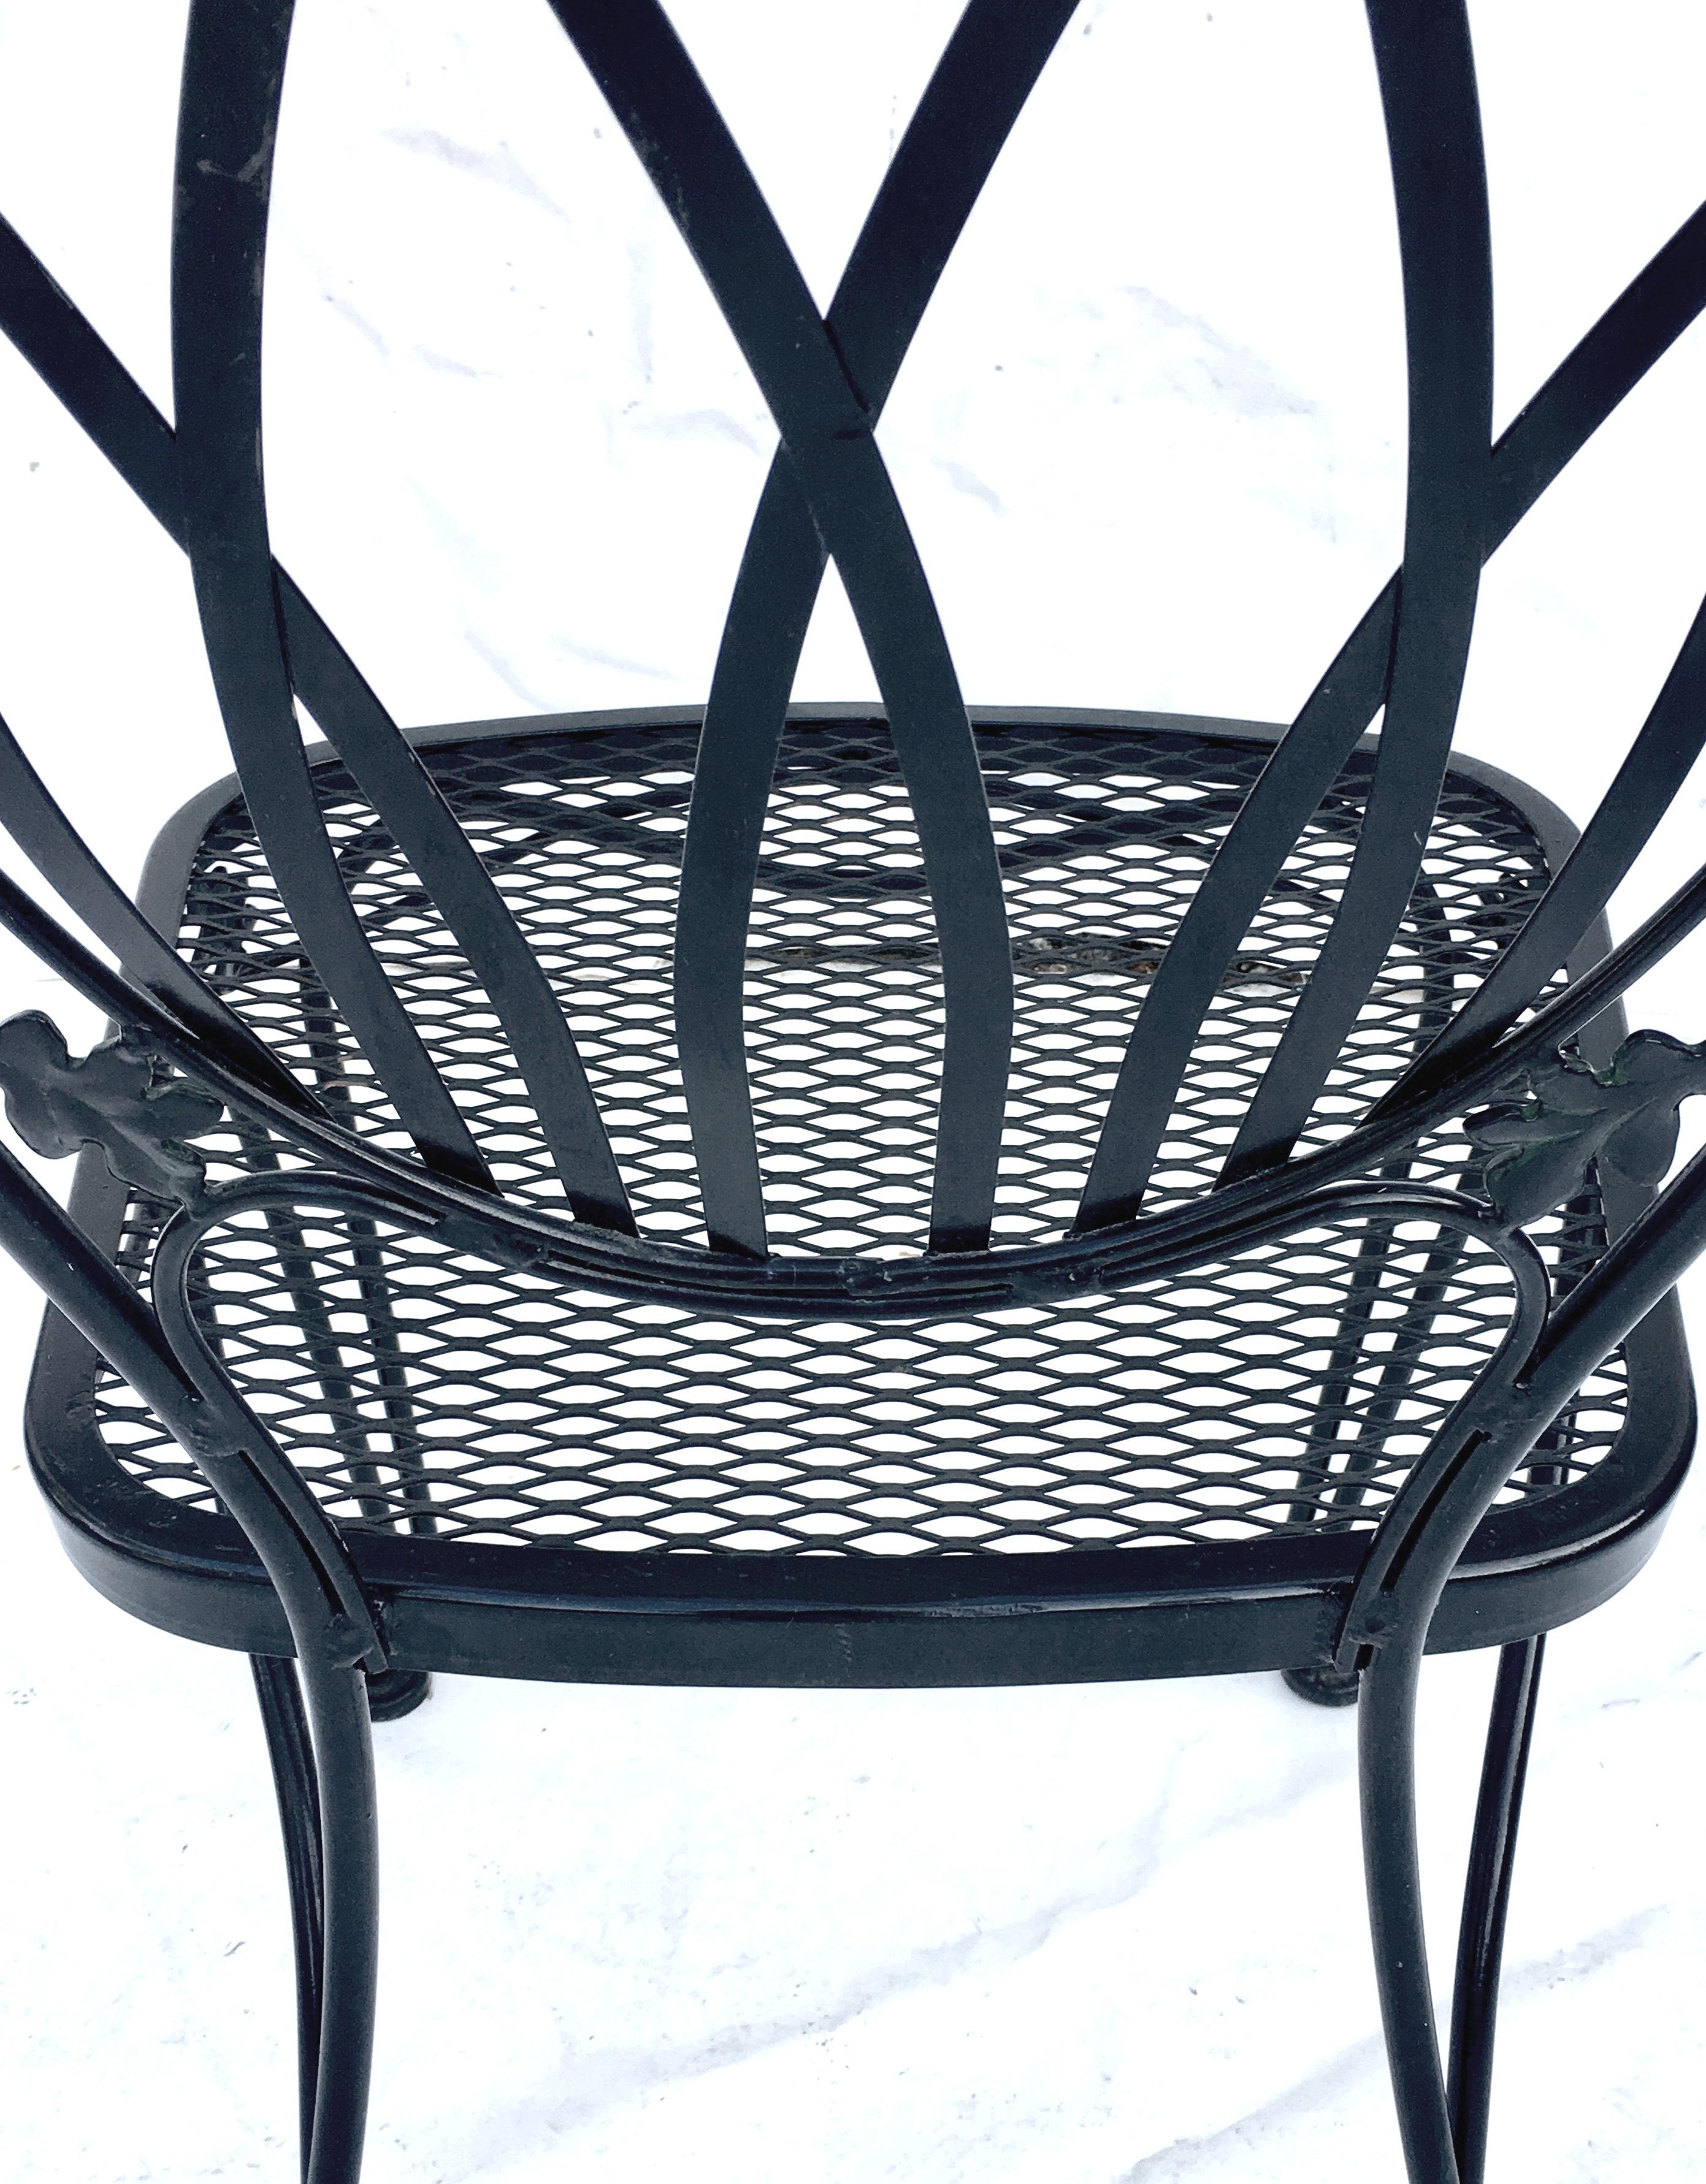 1950'S Wrought Iron Mesh Floral & Vine Chairs By Woodard-S/5 For Sale 3